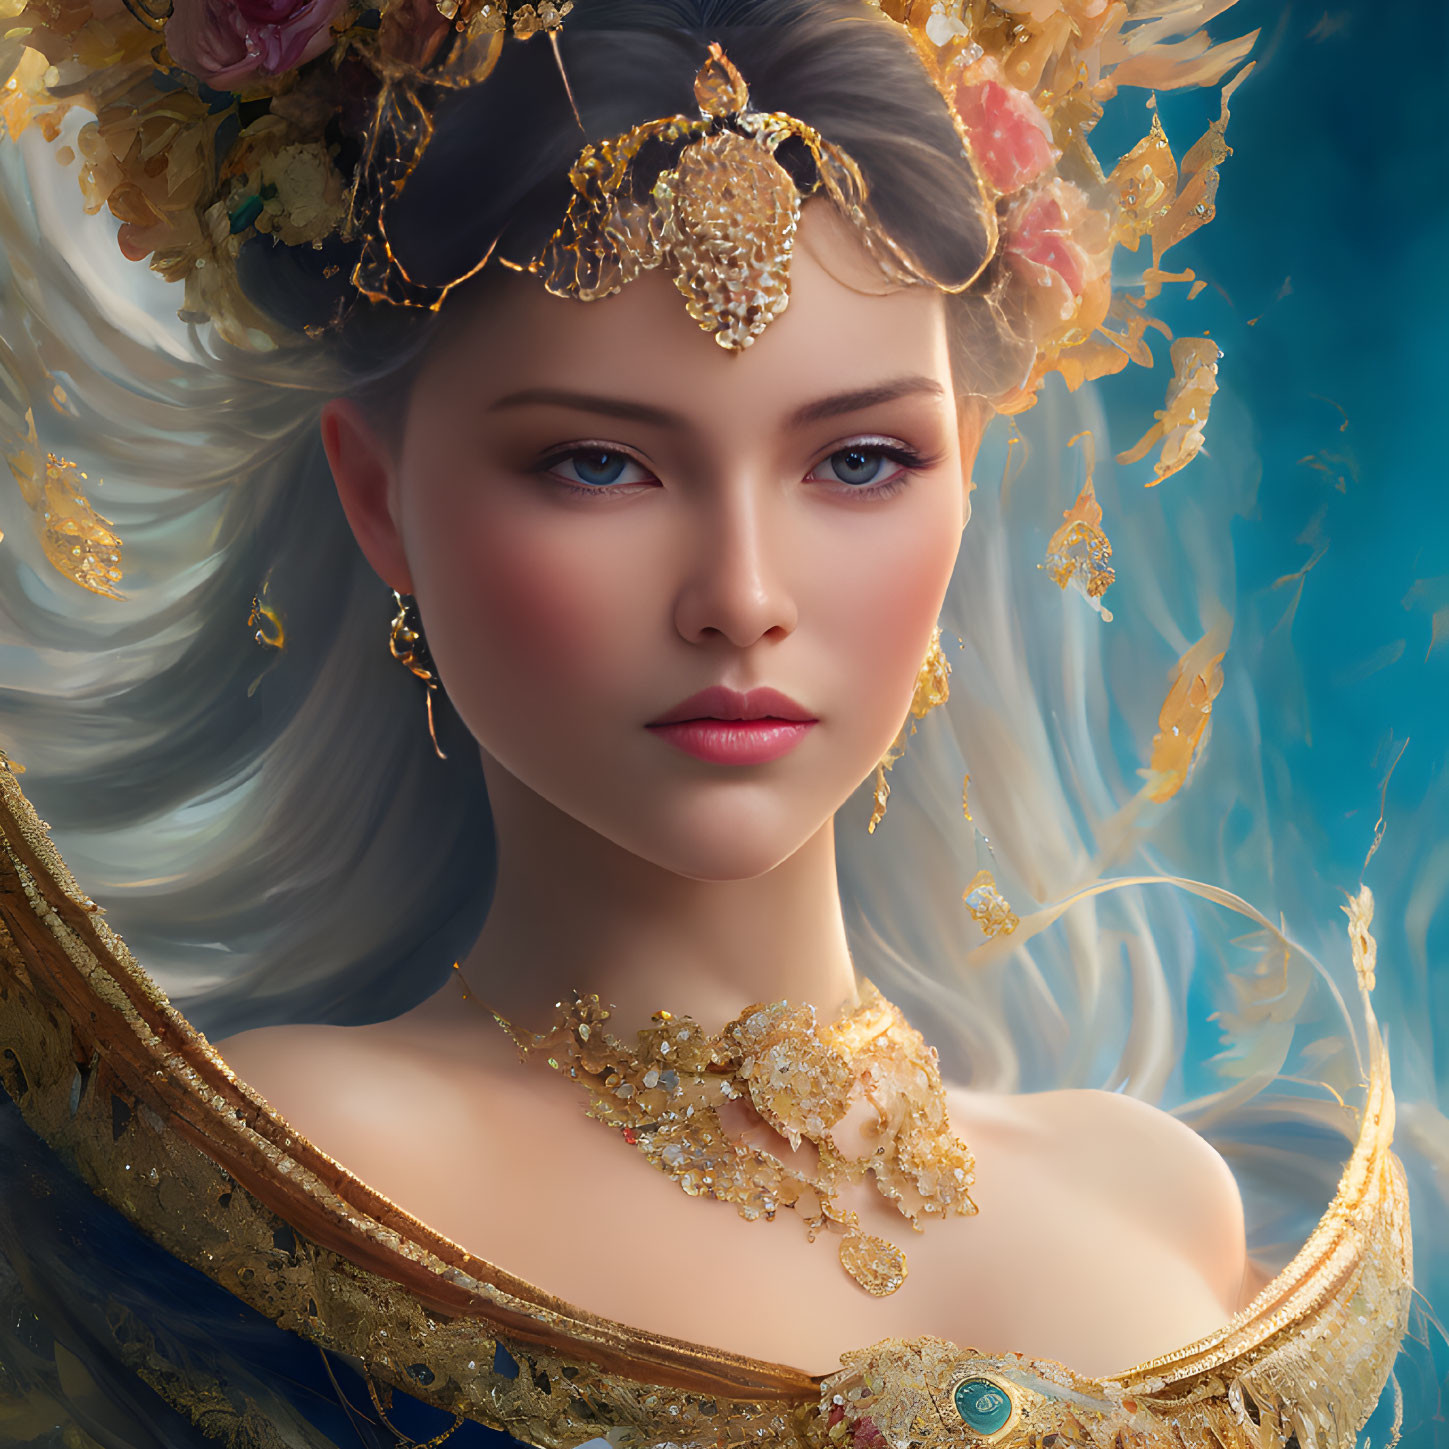 Digital portrait of woman with gold jewelry & floral crown on mystical blue background.